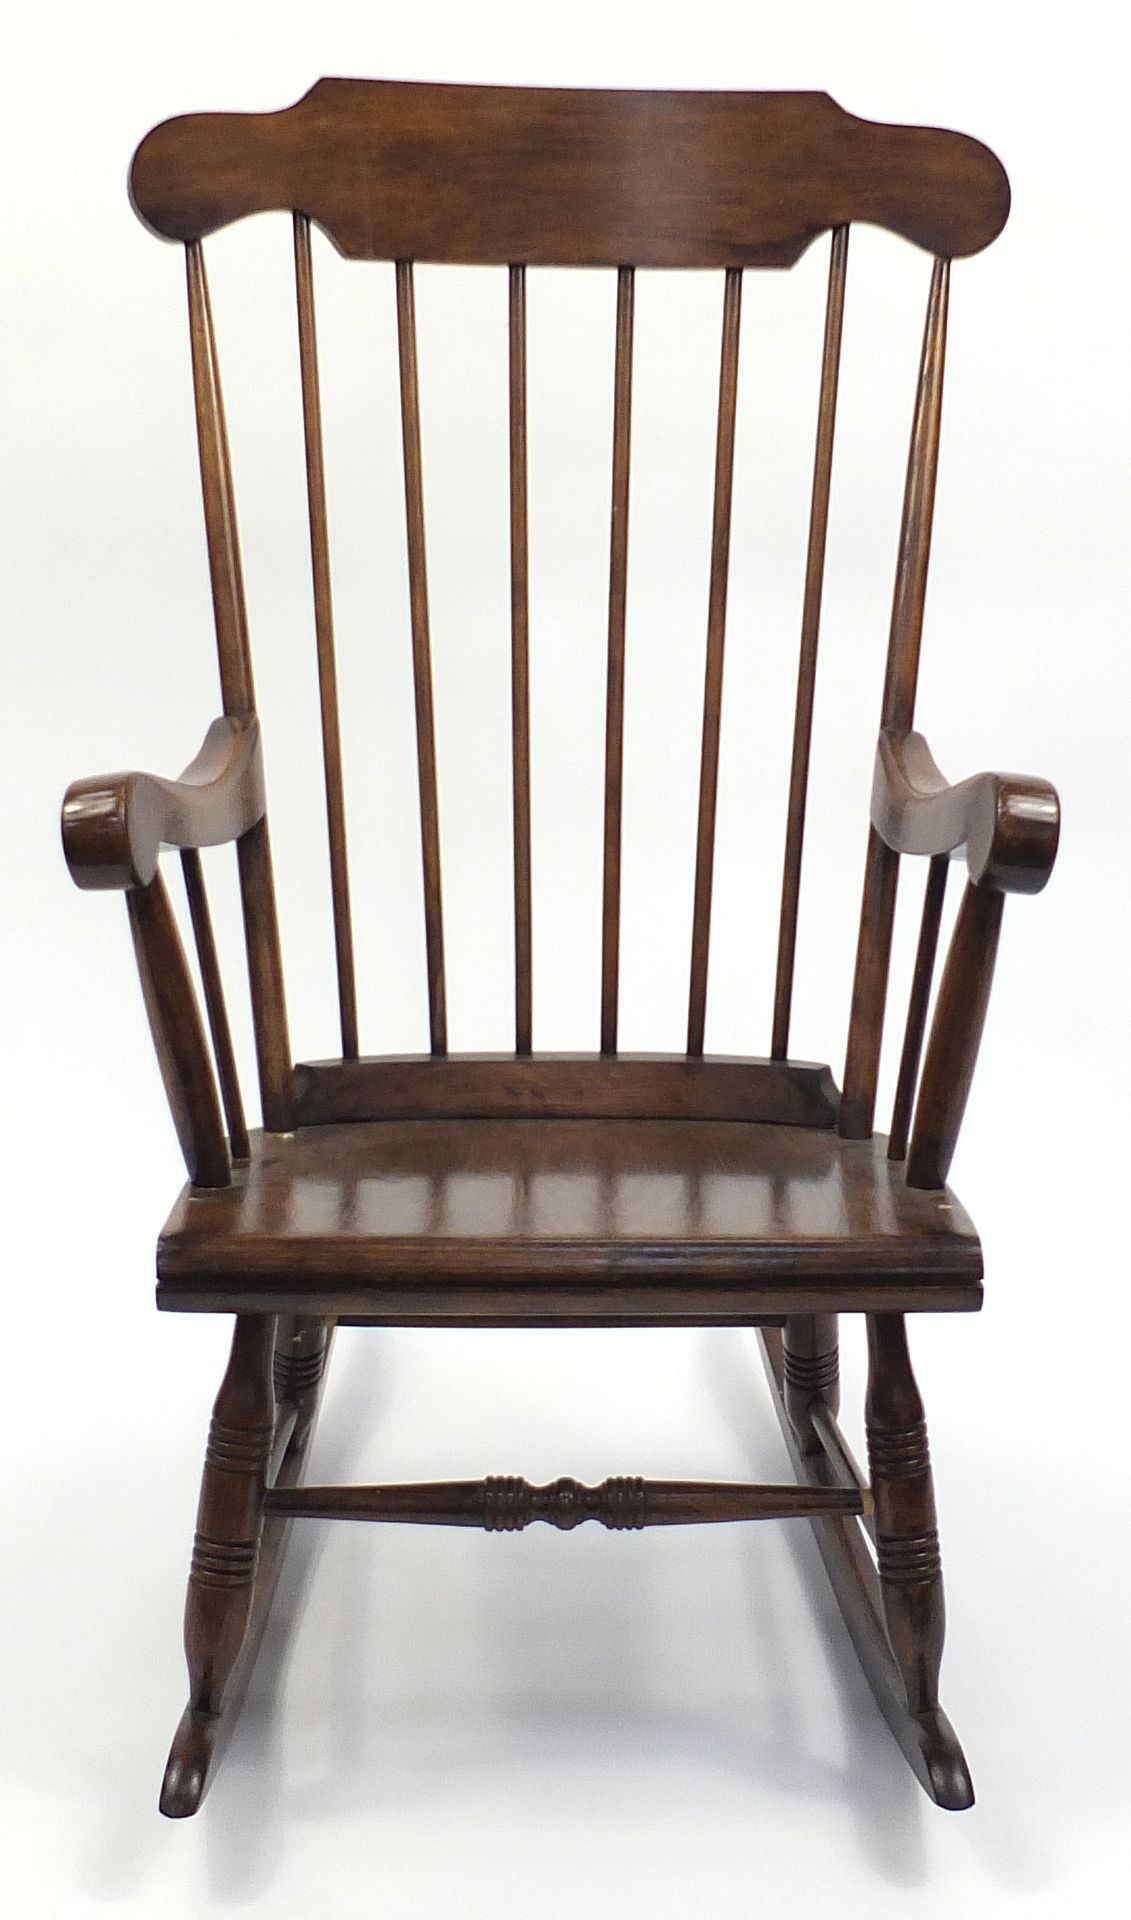 Stained wood stick back rocking chair, 105cm high - Image 2 of 3